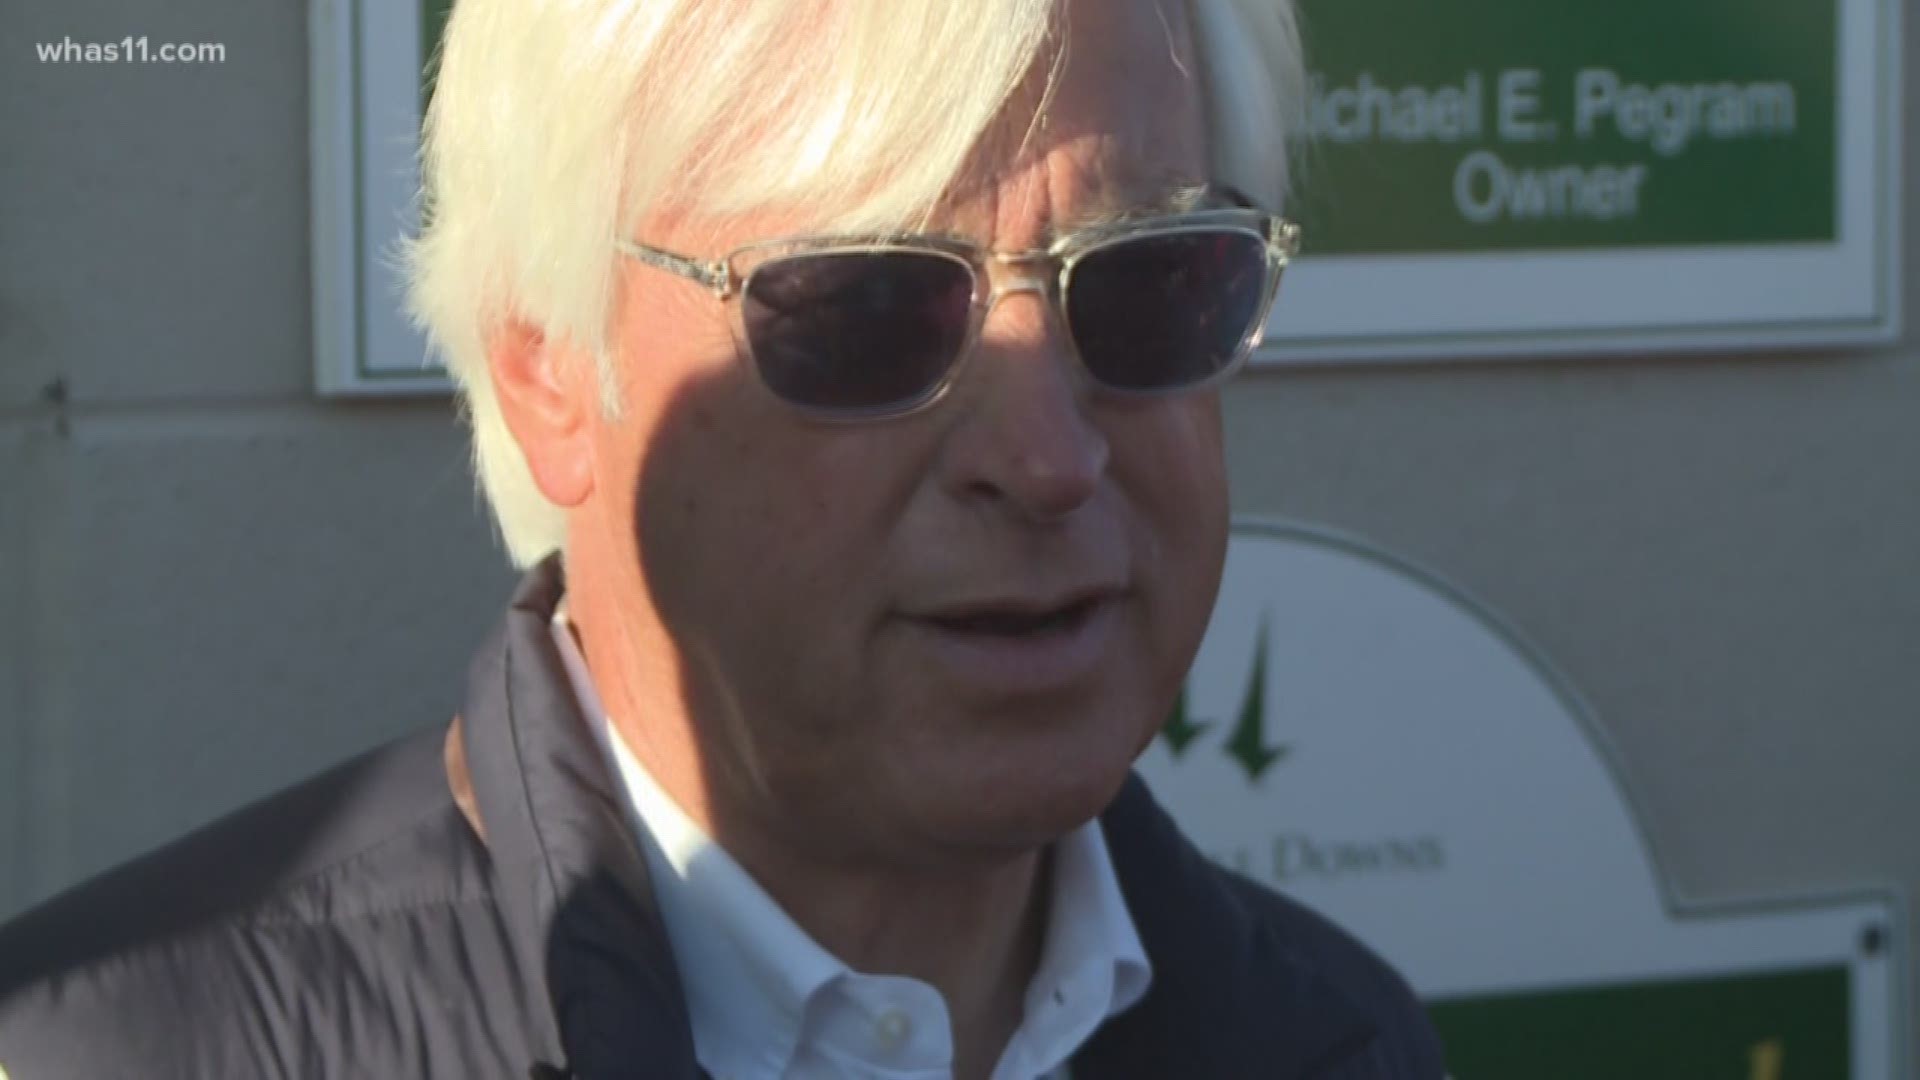 Bob Baffert was a surprise this morning on the backside of Churchill Downs. The 5-time Kentucky Derby-winning trainer was in to see Improbable work over the track. His other two hopefuls remain out in California at Santa Anita -- the same track whose had more than 20 horses died over about three months. The track was even closed for a short time but Baffert says things have gotten so much better at Santa Anita.